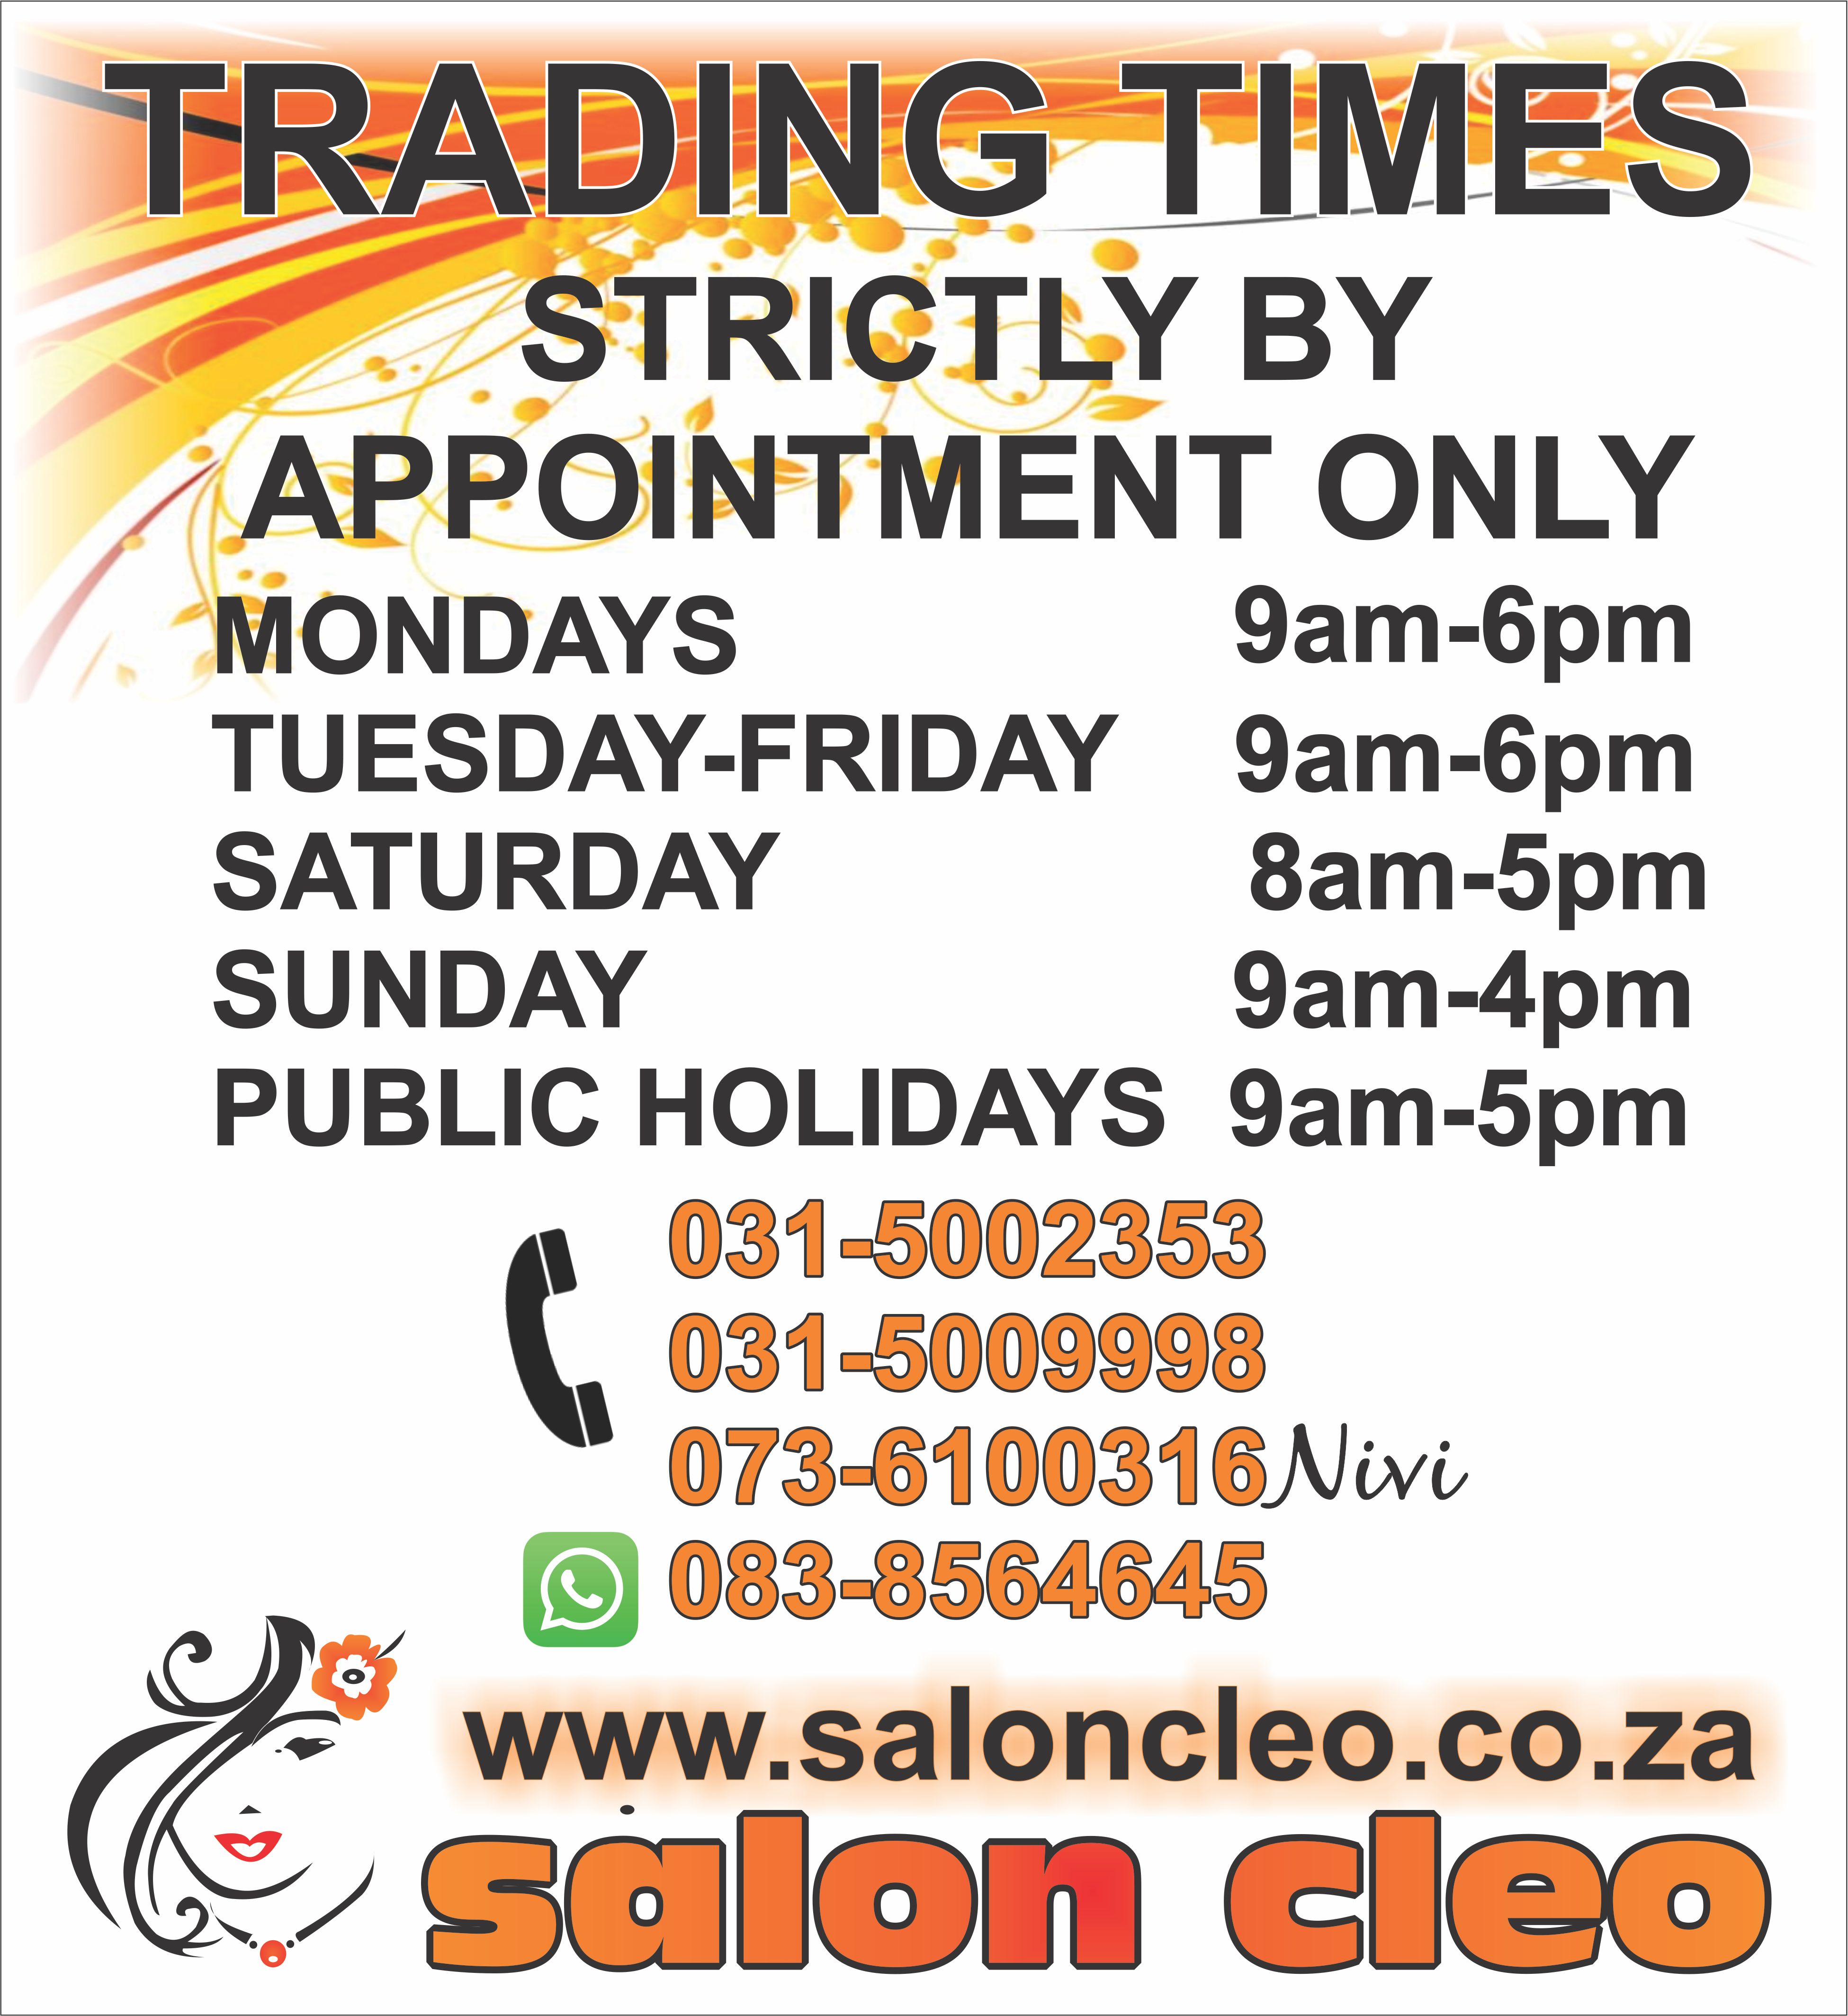 SALON CLEO FOR A NEW GENERATION IN HAIR SALONS KZN 0315009998